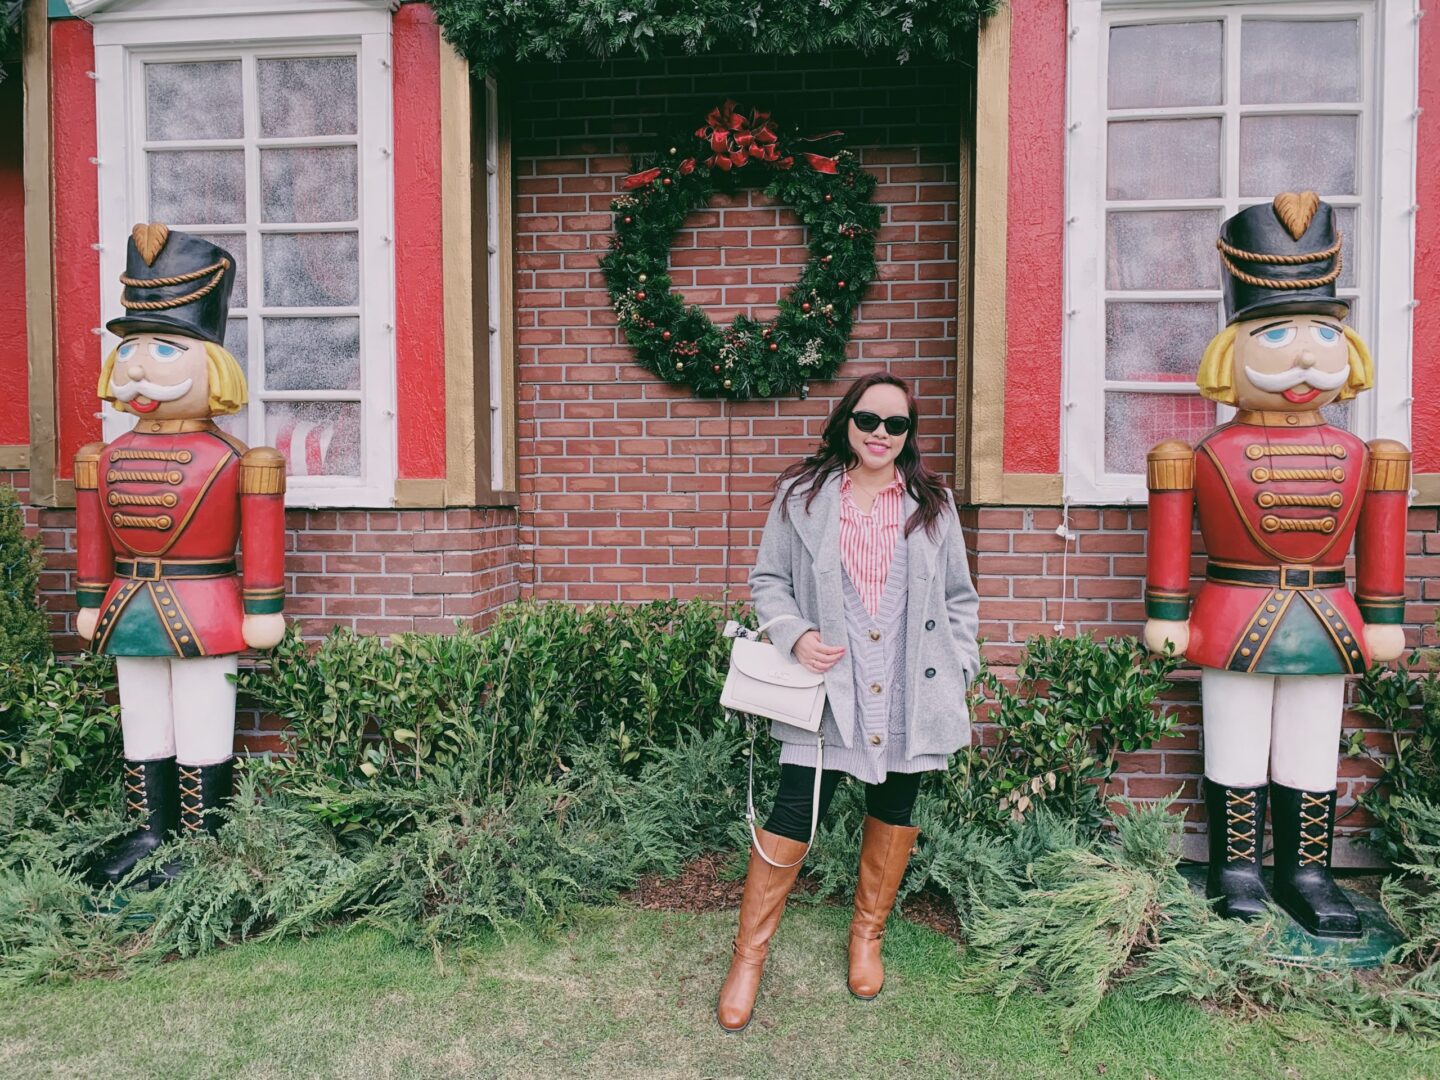 pslilyboutique-fashion-blog-christmas-decorations-wreath-heart's-desire-home-outdoor-space-nutcracker-statues-decor-Americana-at-Brand-Los-Angeles-Fashion-Blogger-Travel-Naturalizer-brown-knee-high-boots-winter-2019-outfit-ideas-12-5-19